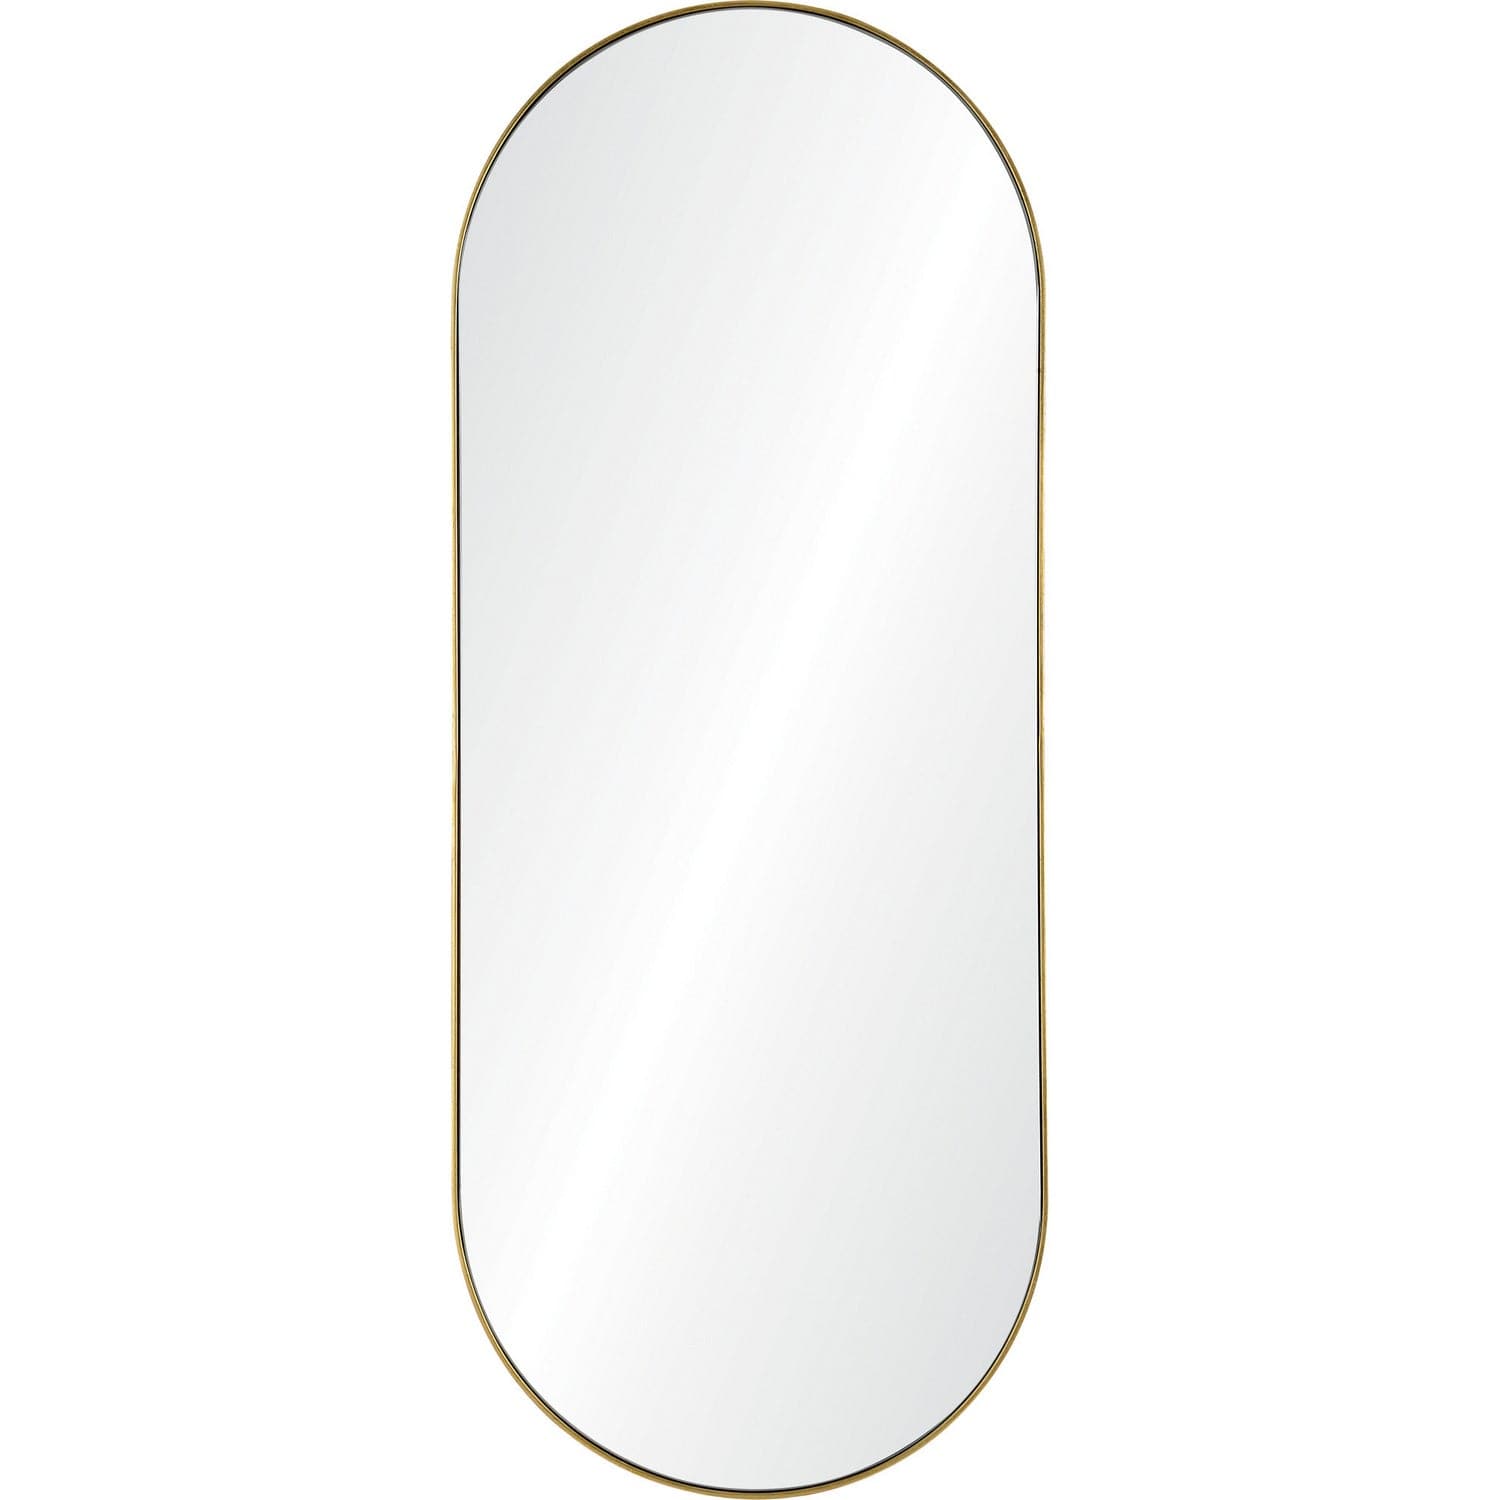 Renwil - MT2366 - Mirrors/Pictures - Mirrors-Oval/Rd.